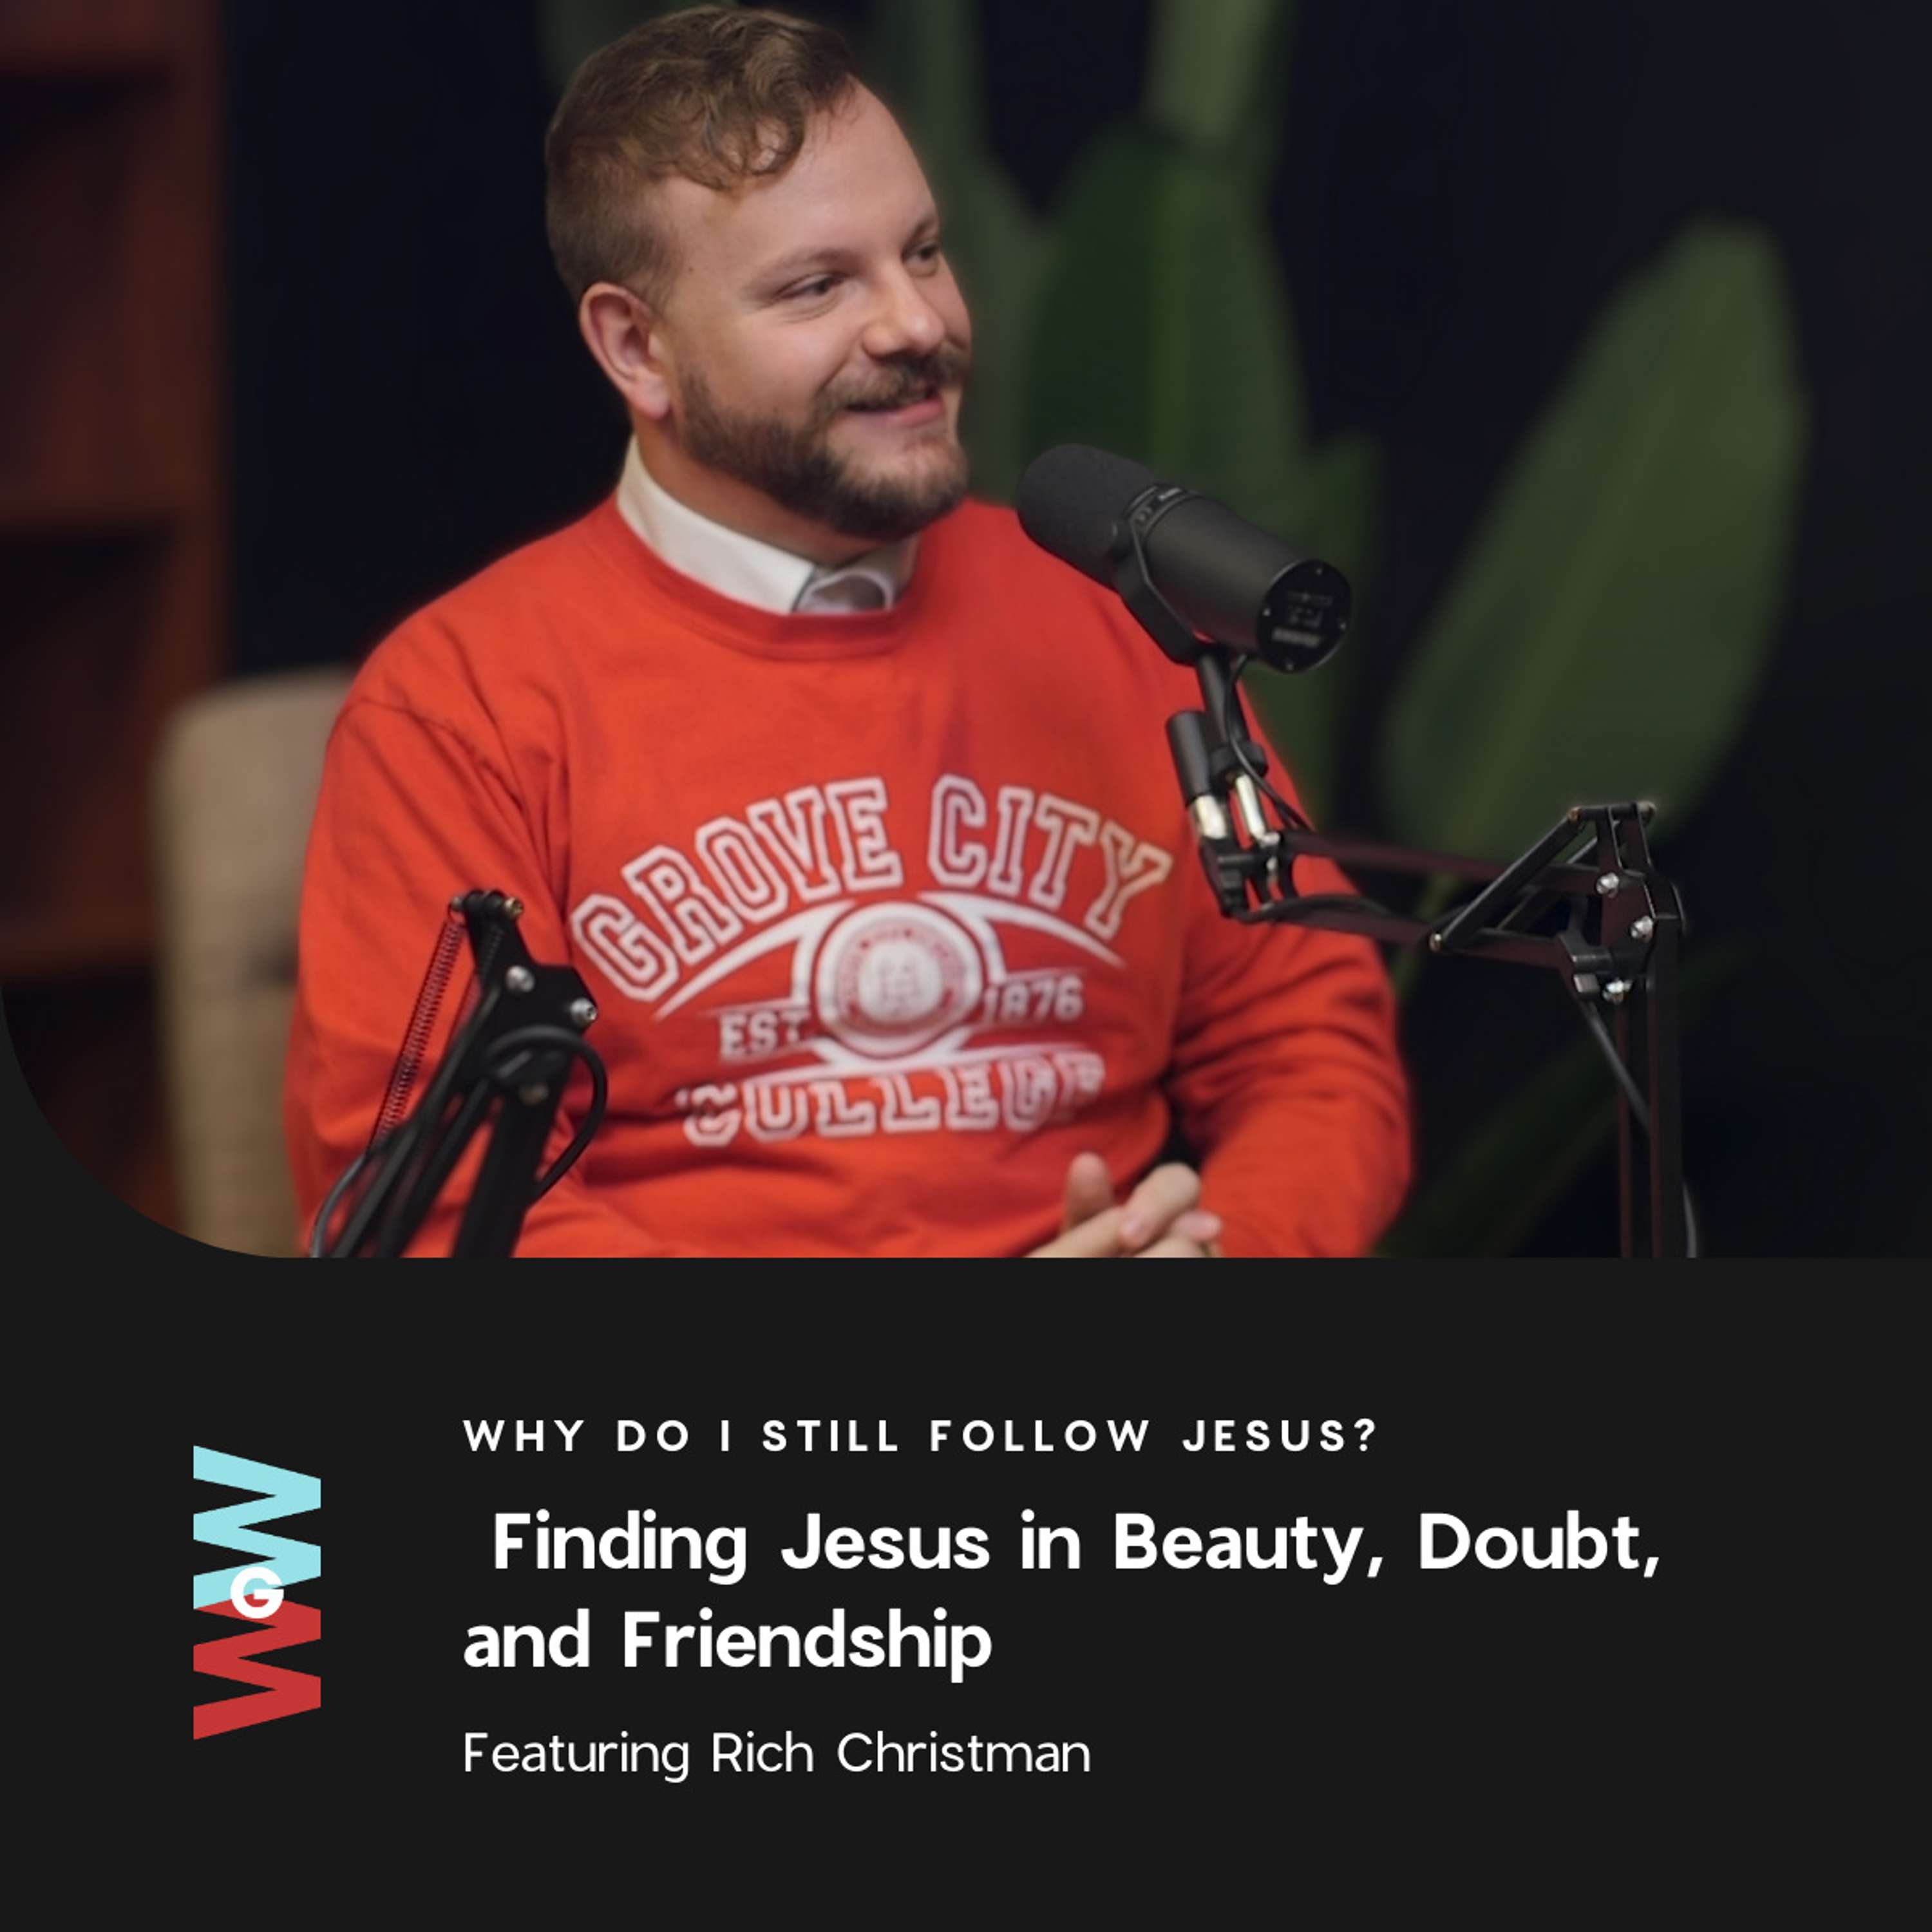 Rich Christman - Why do I still follow Jesus? (Finding Jesus in Beauty, Doubt, and Friendship)